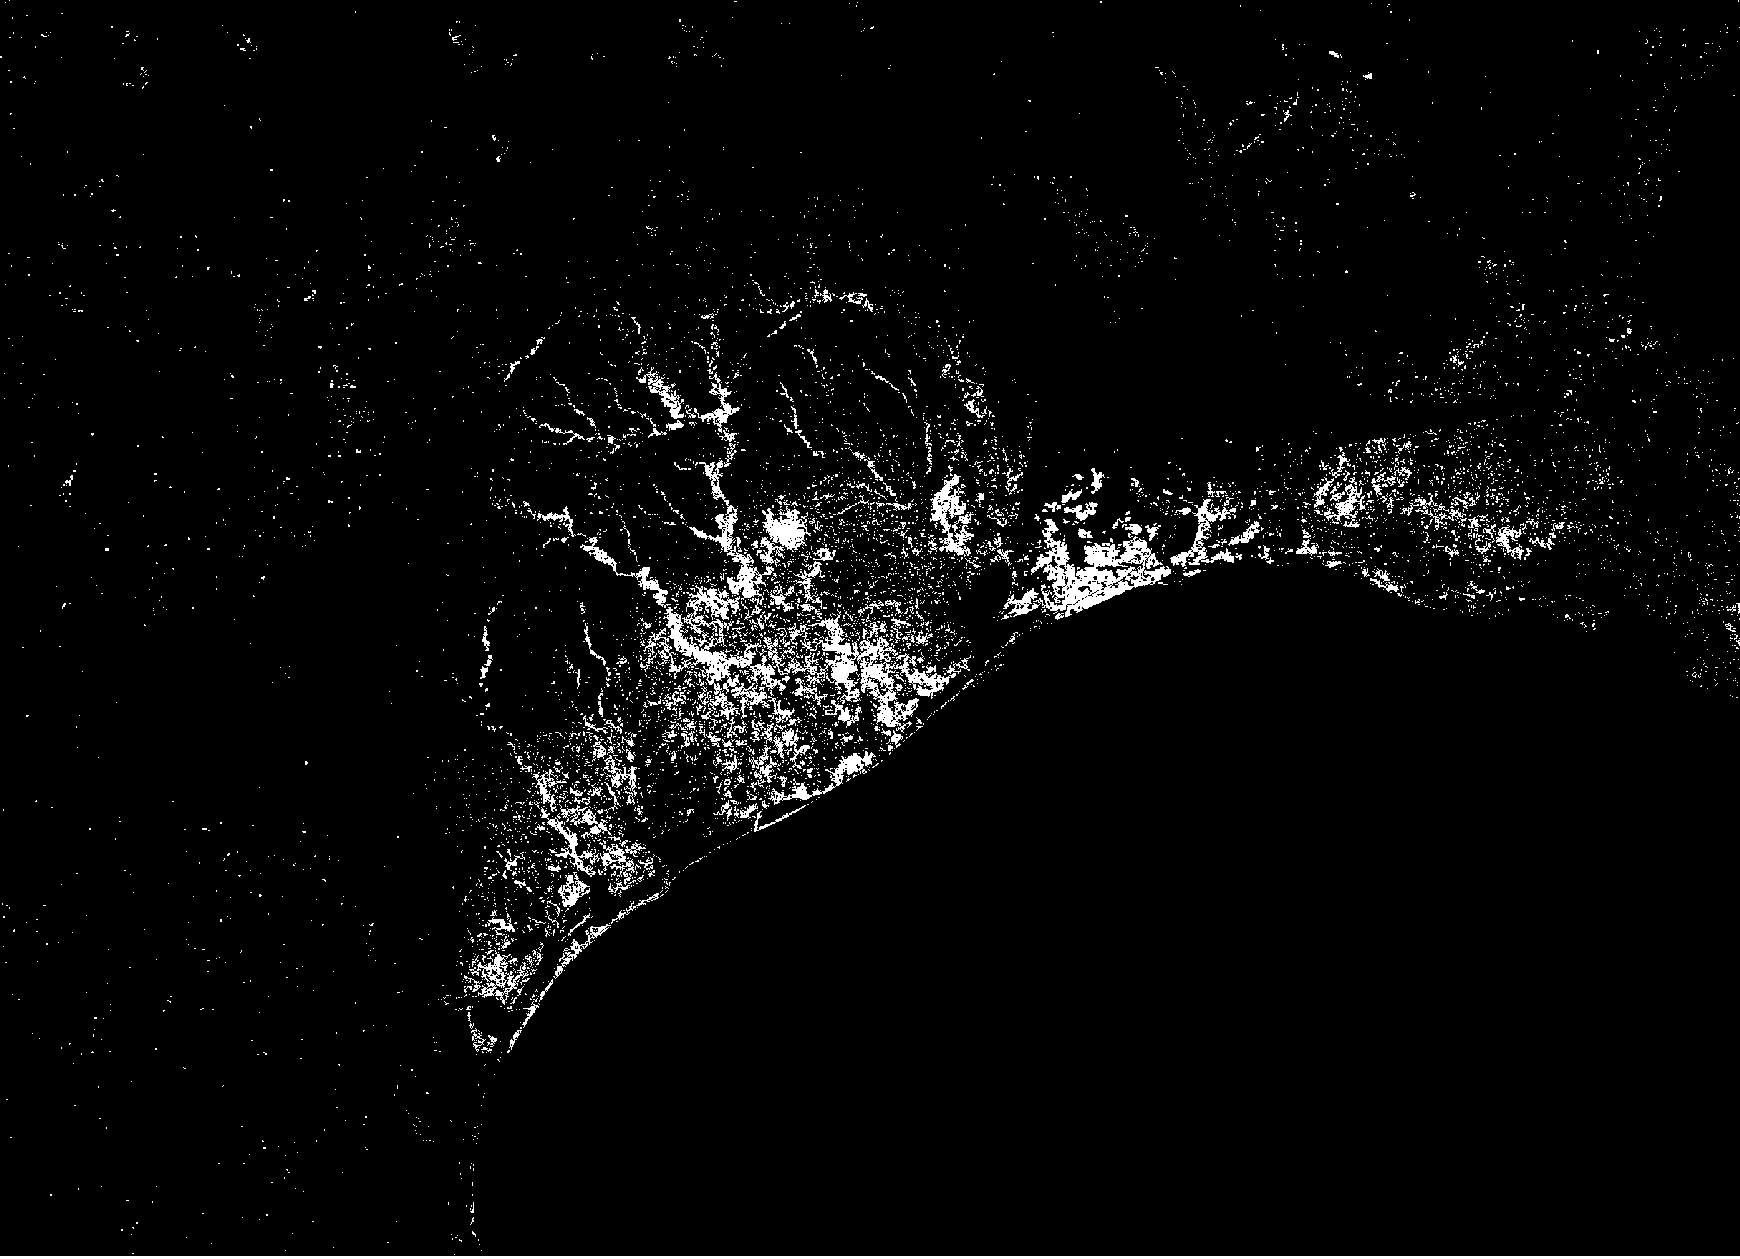 A portion of the US map centered on the Texas Gulf Coast shows the maximum flood extent with flood waters shown in white and other areas in black.